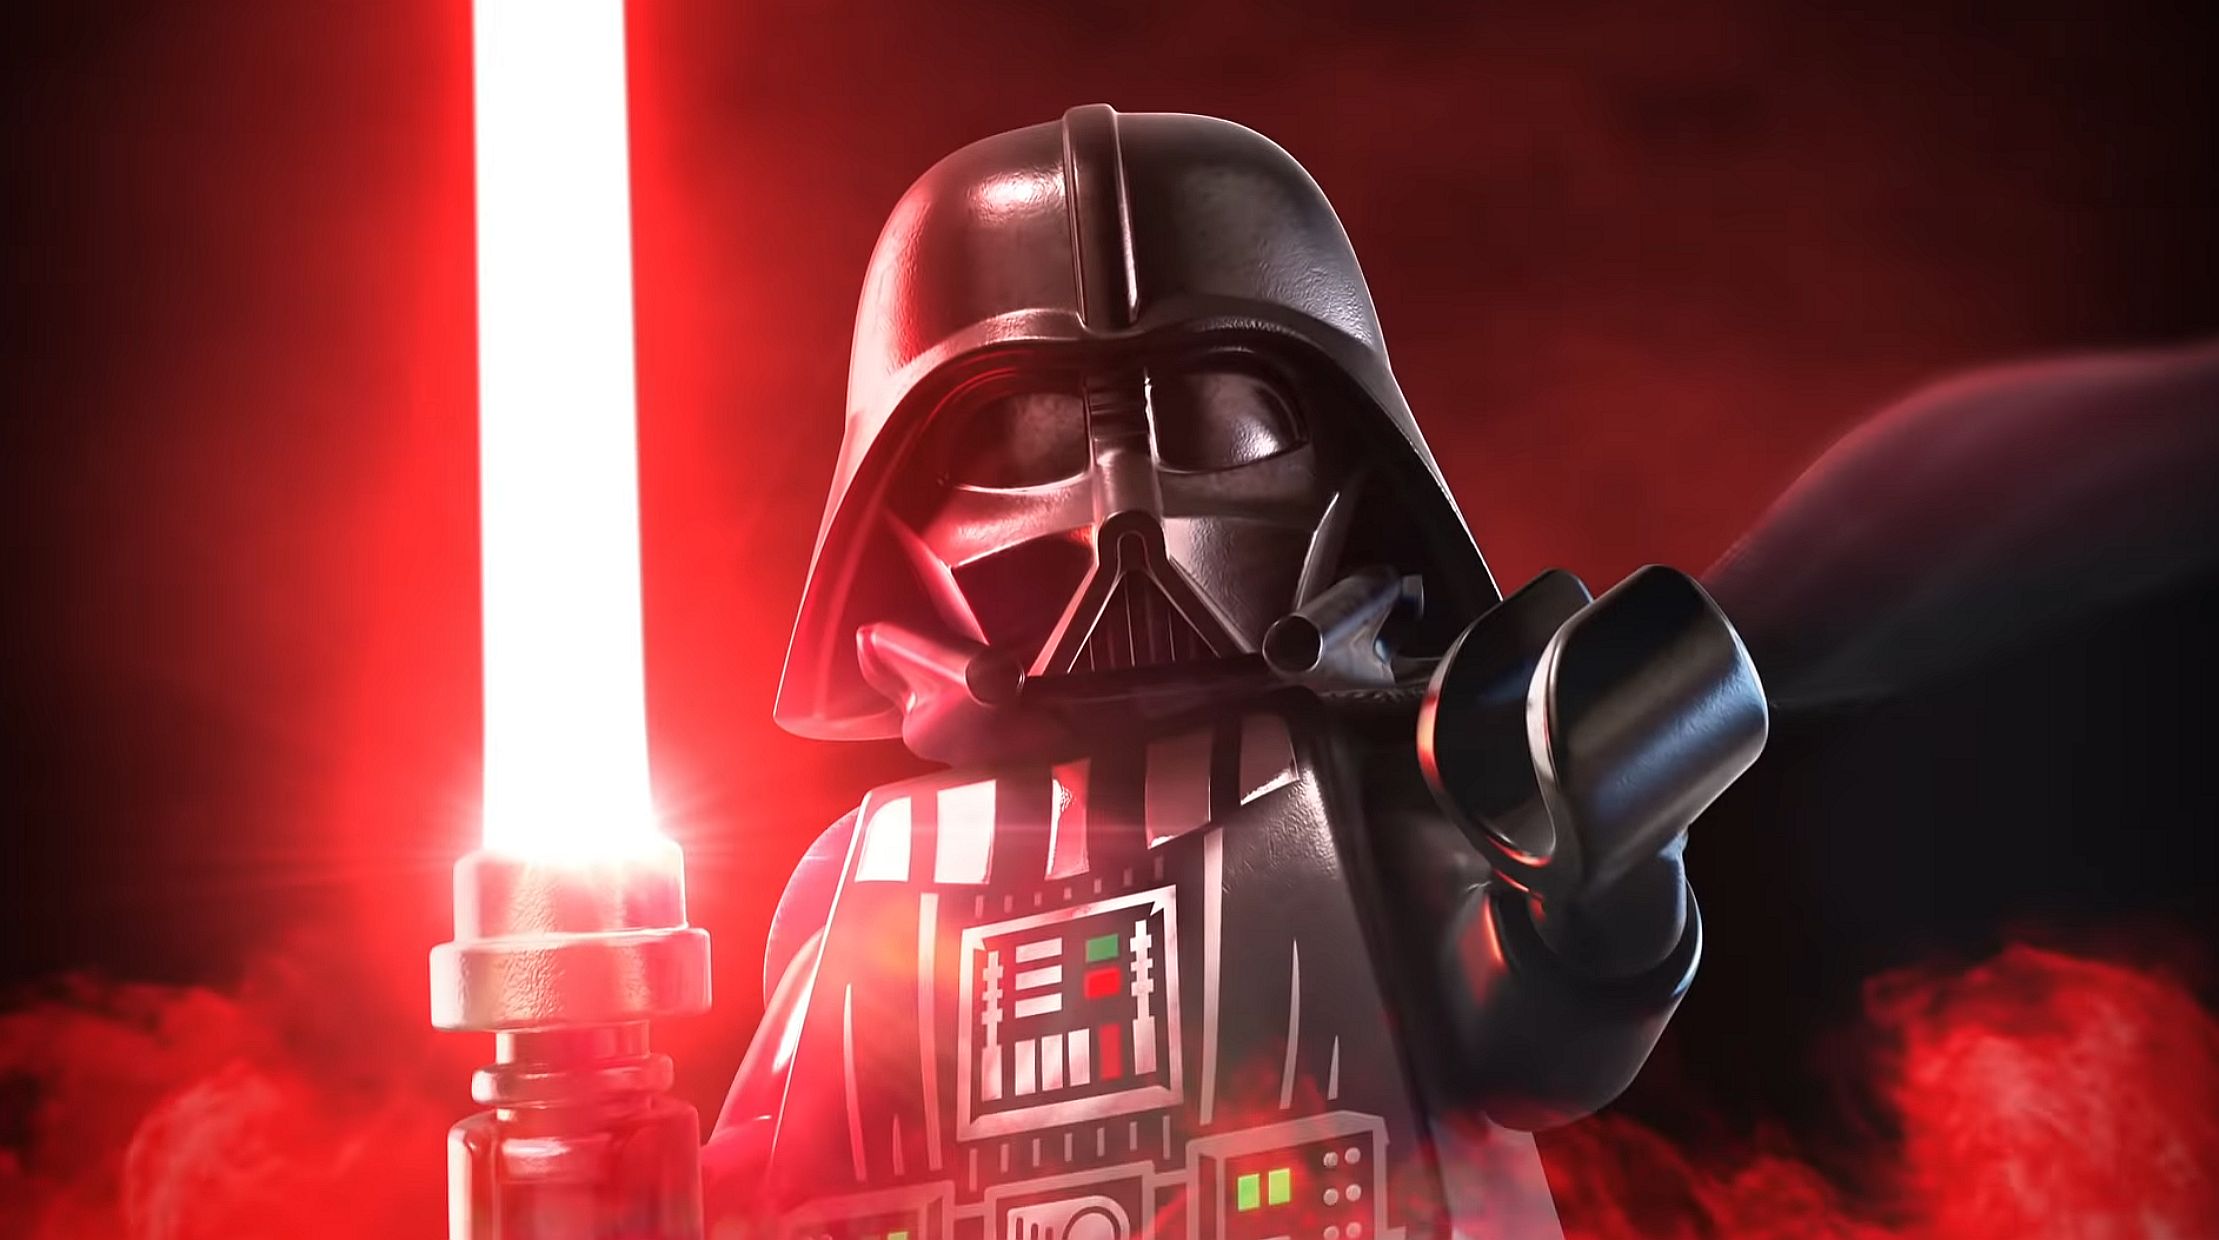 Image for LEGO Star Wars: The Skywalker Saga developer video highlights content and the game's sense of freedom